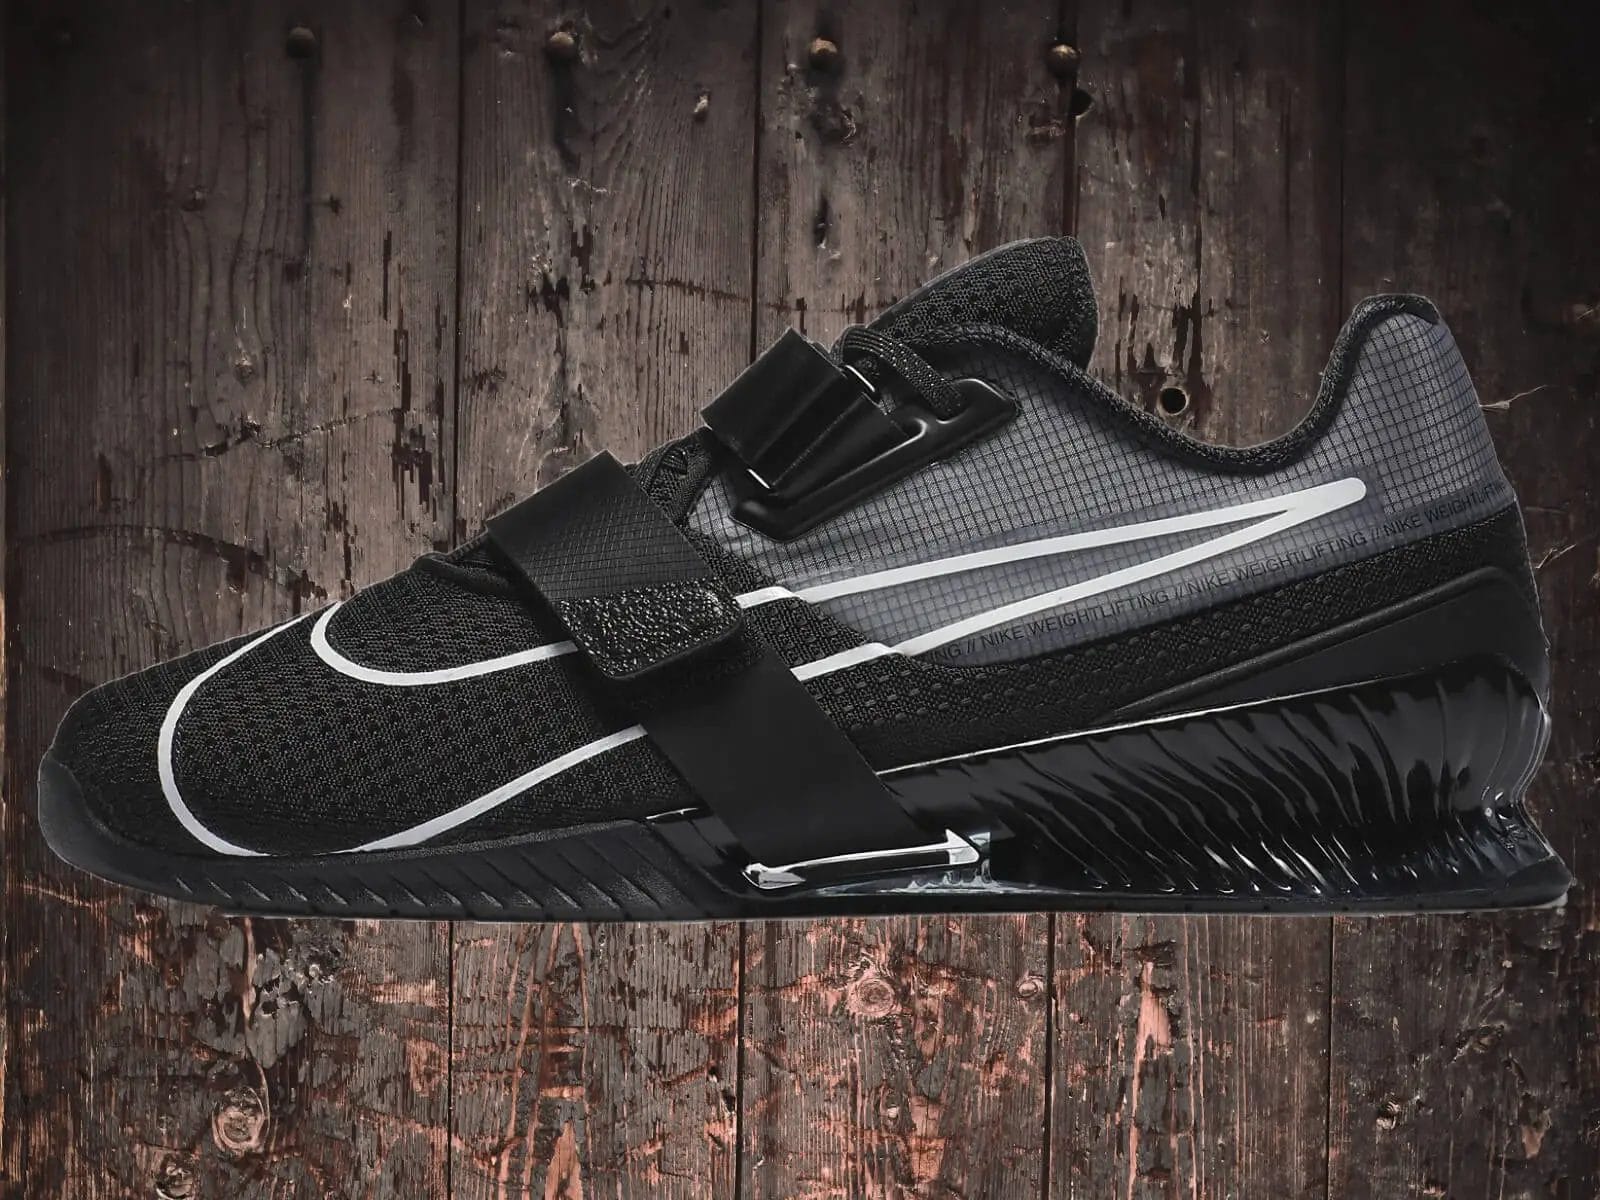 Nike Romaleos 4 in black colorway. A top choice for the best weightlifting shoes.